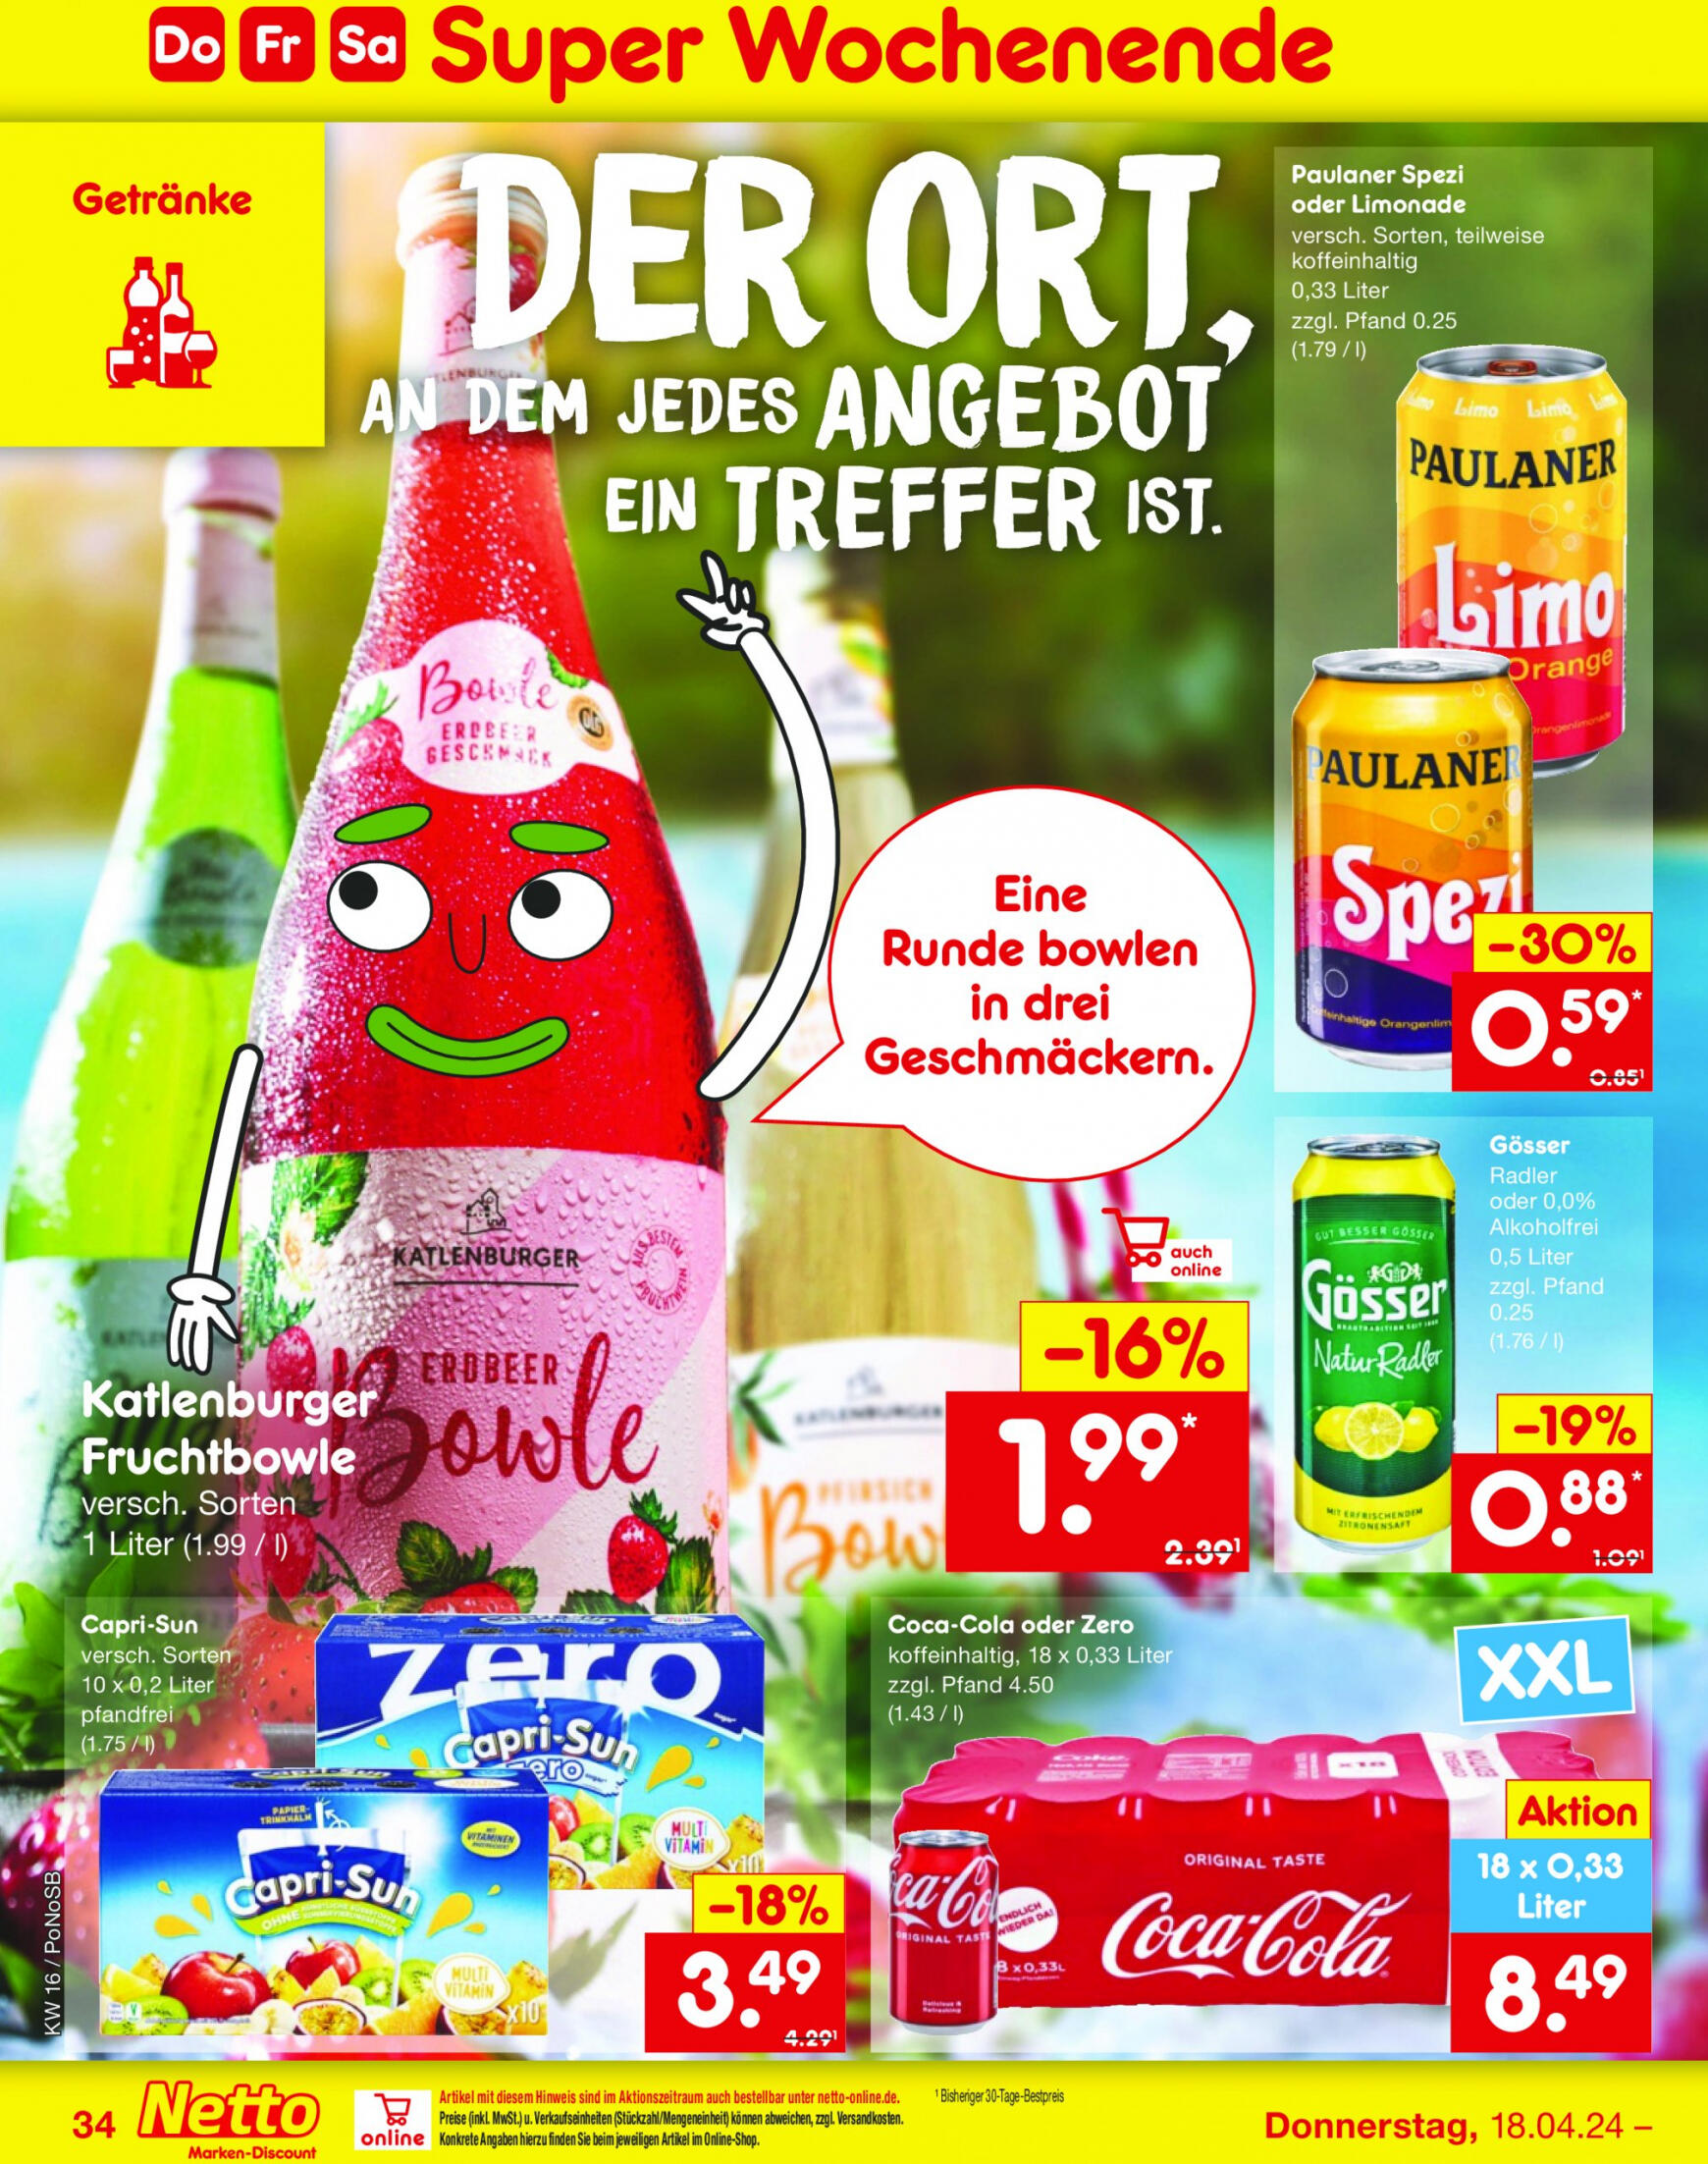 netto - Flyer Netto aktuell 15.04. - 20.04. - page: 40